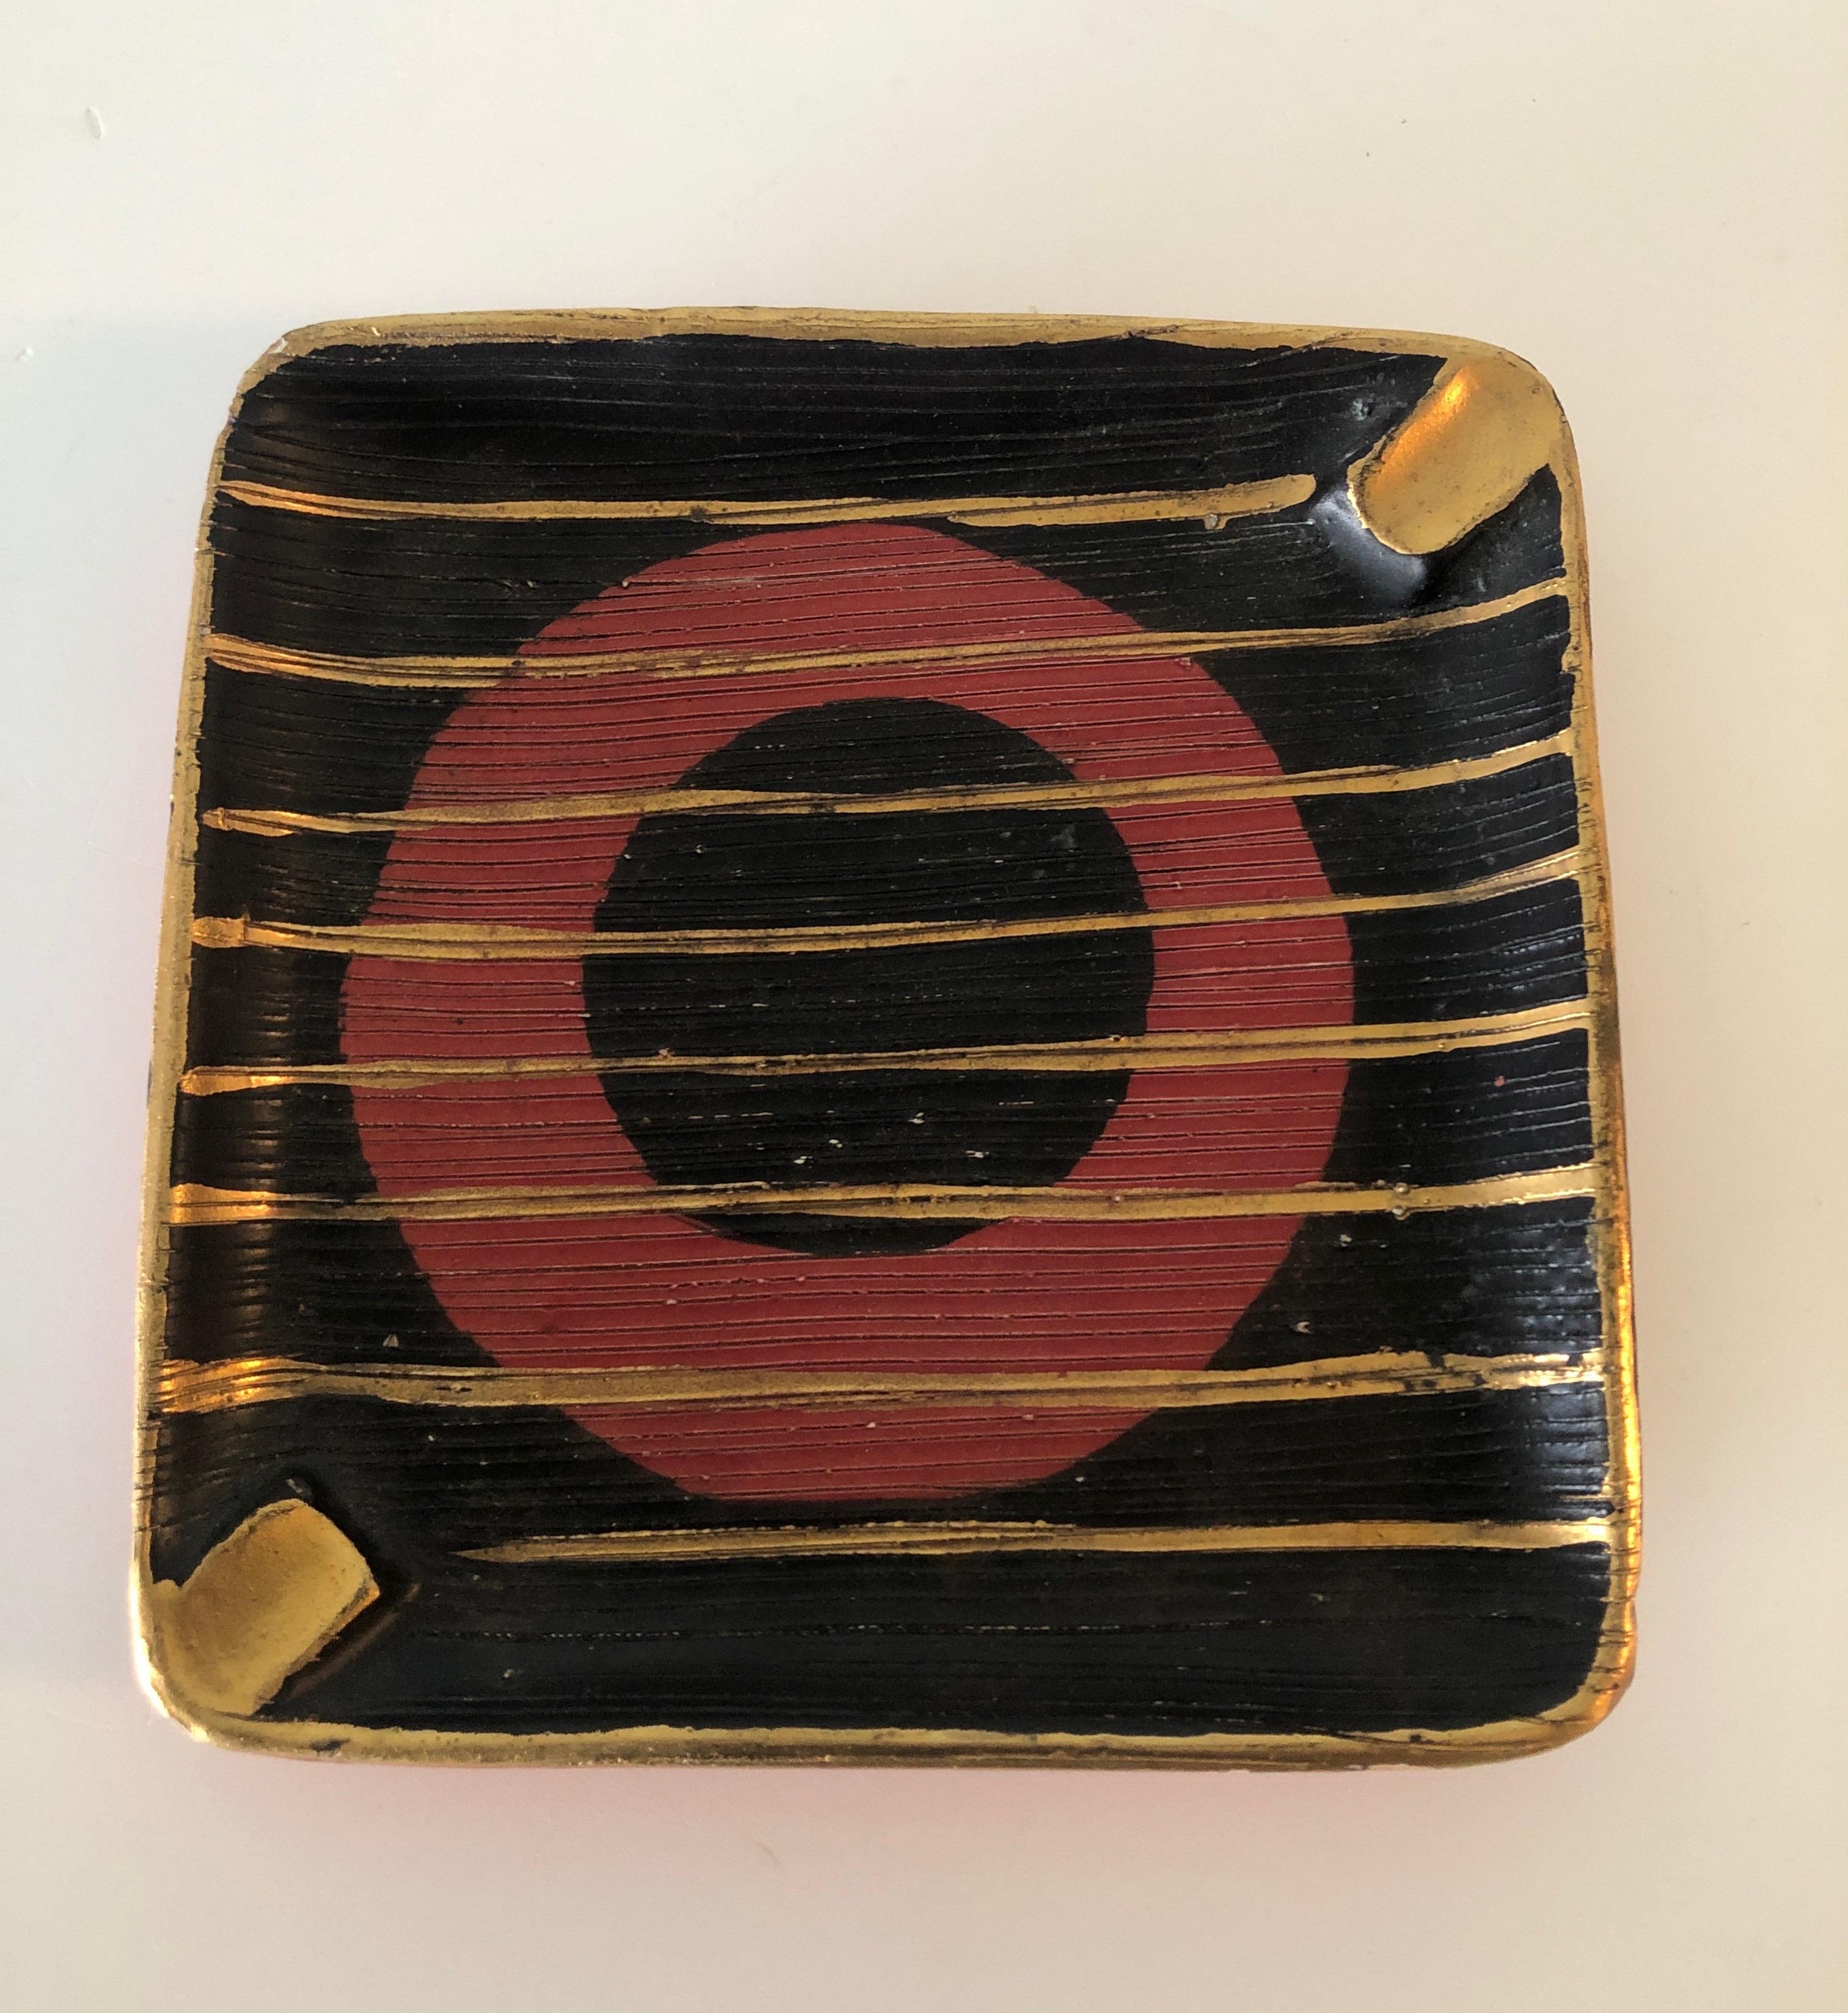 Square red and and black ashtray with gold paint details.
Mid-Century Modern ceramic 
Size: 7.5” x 7.5” x 1” H
Stamped made in Italy.